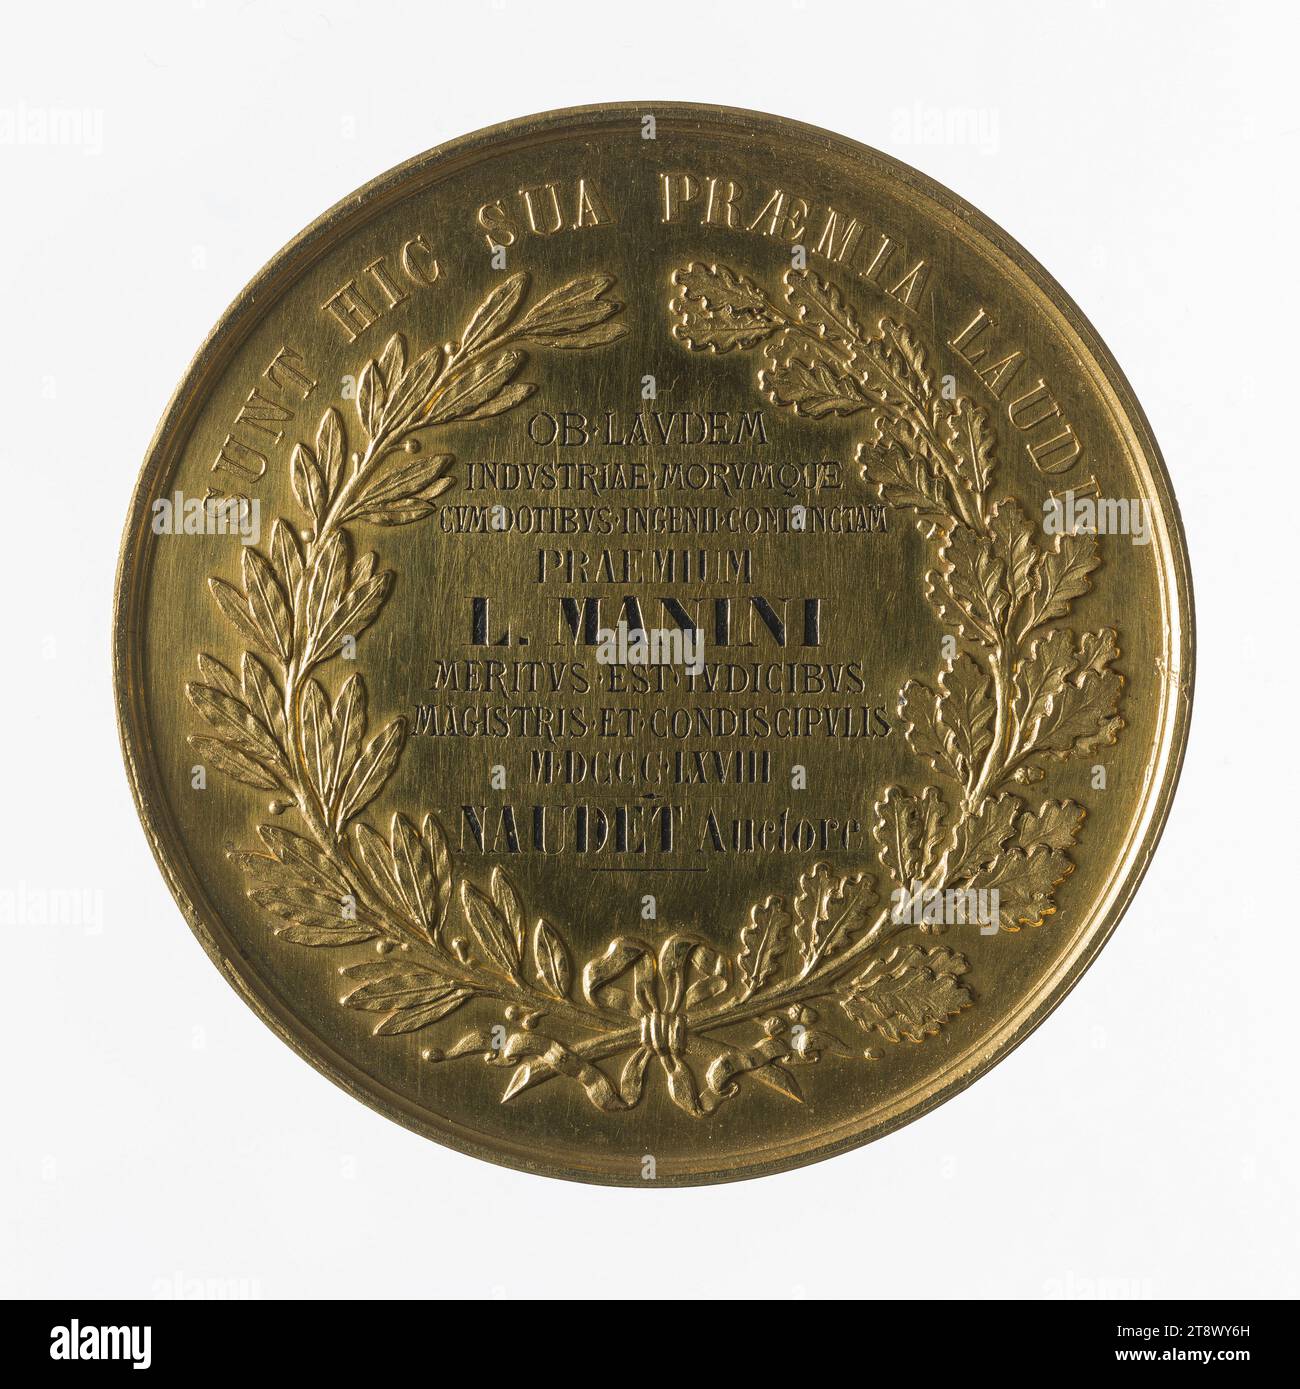 Medal of the College Henri IV, 1868, Caqué, Armand-Auguste, Engraver in medals, Naudet, Thomas Charles, Draftsman, Array, Numismatics, Medal, Gold, Dimensions - Work: Diameter: 5 cm, Weight (type dimension): 83.82 g Stock Photo